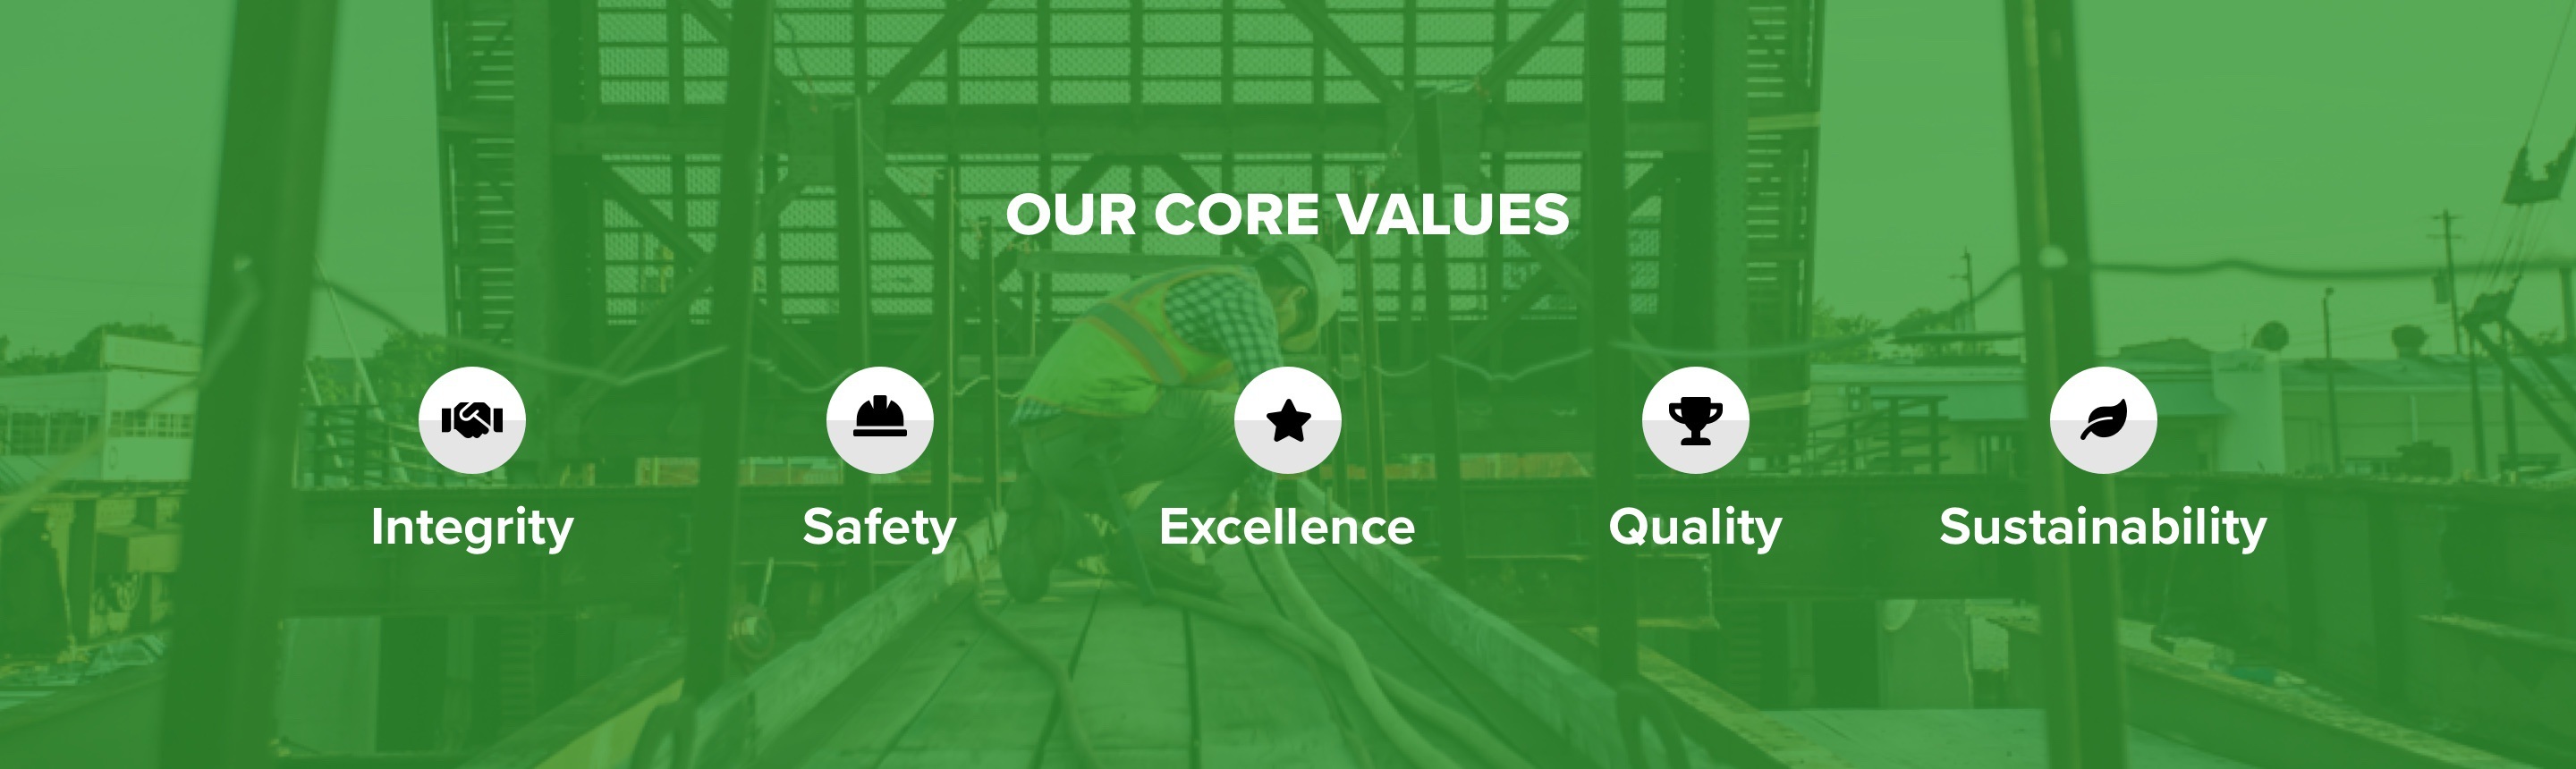 Walbec Group Core Values